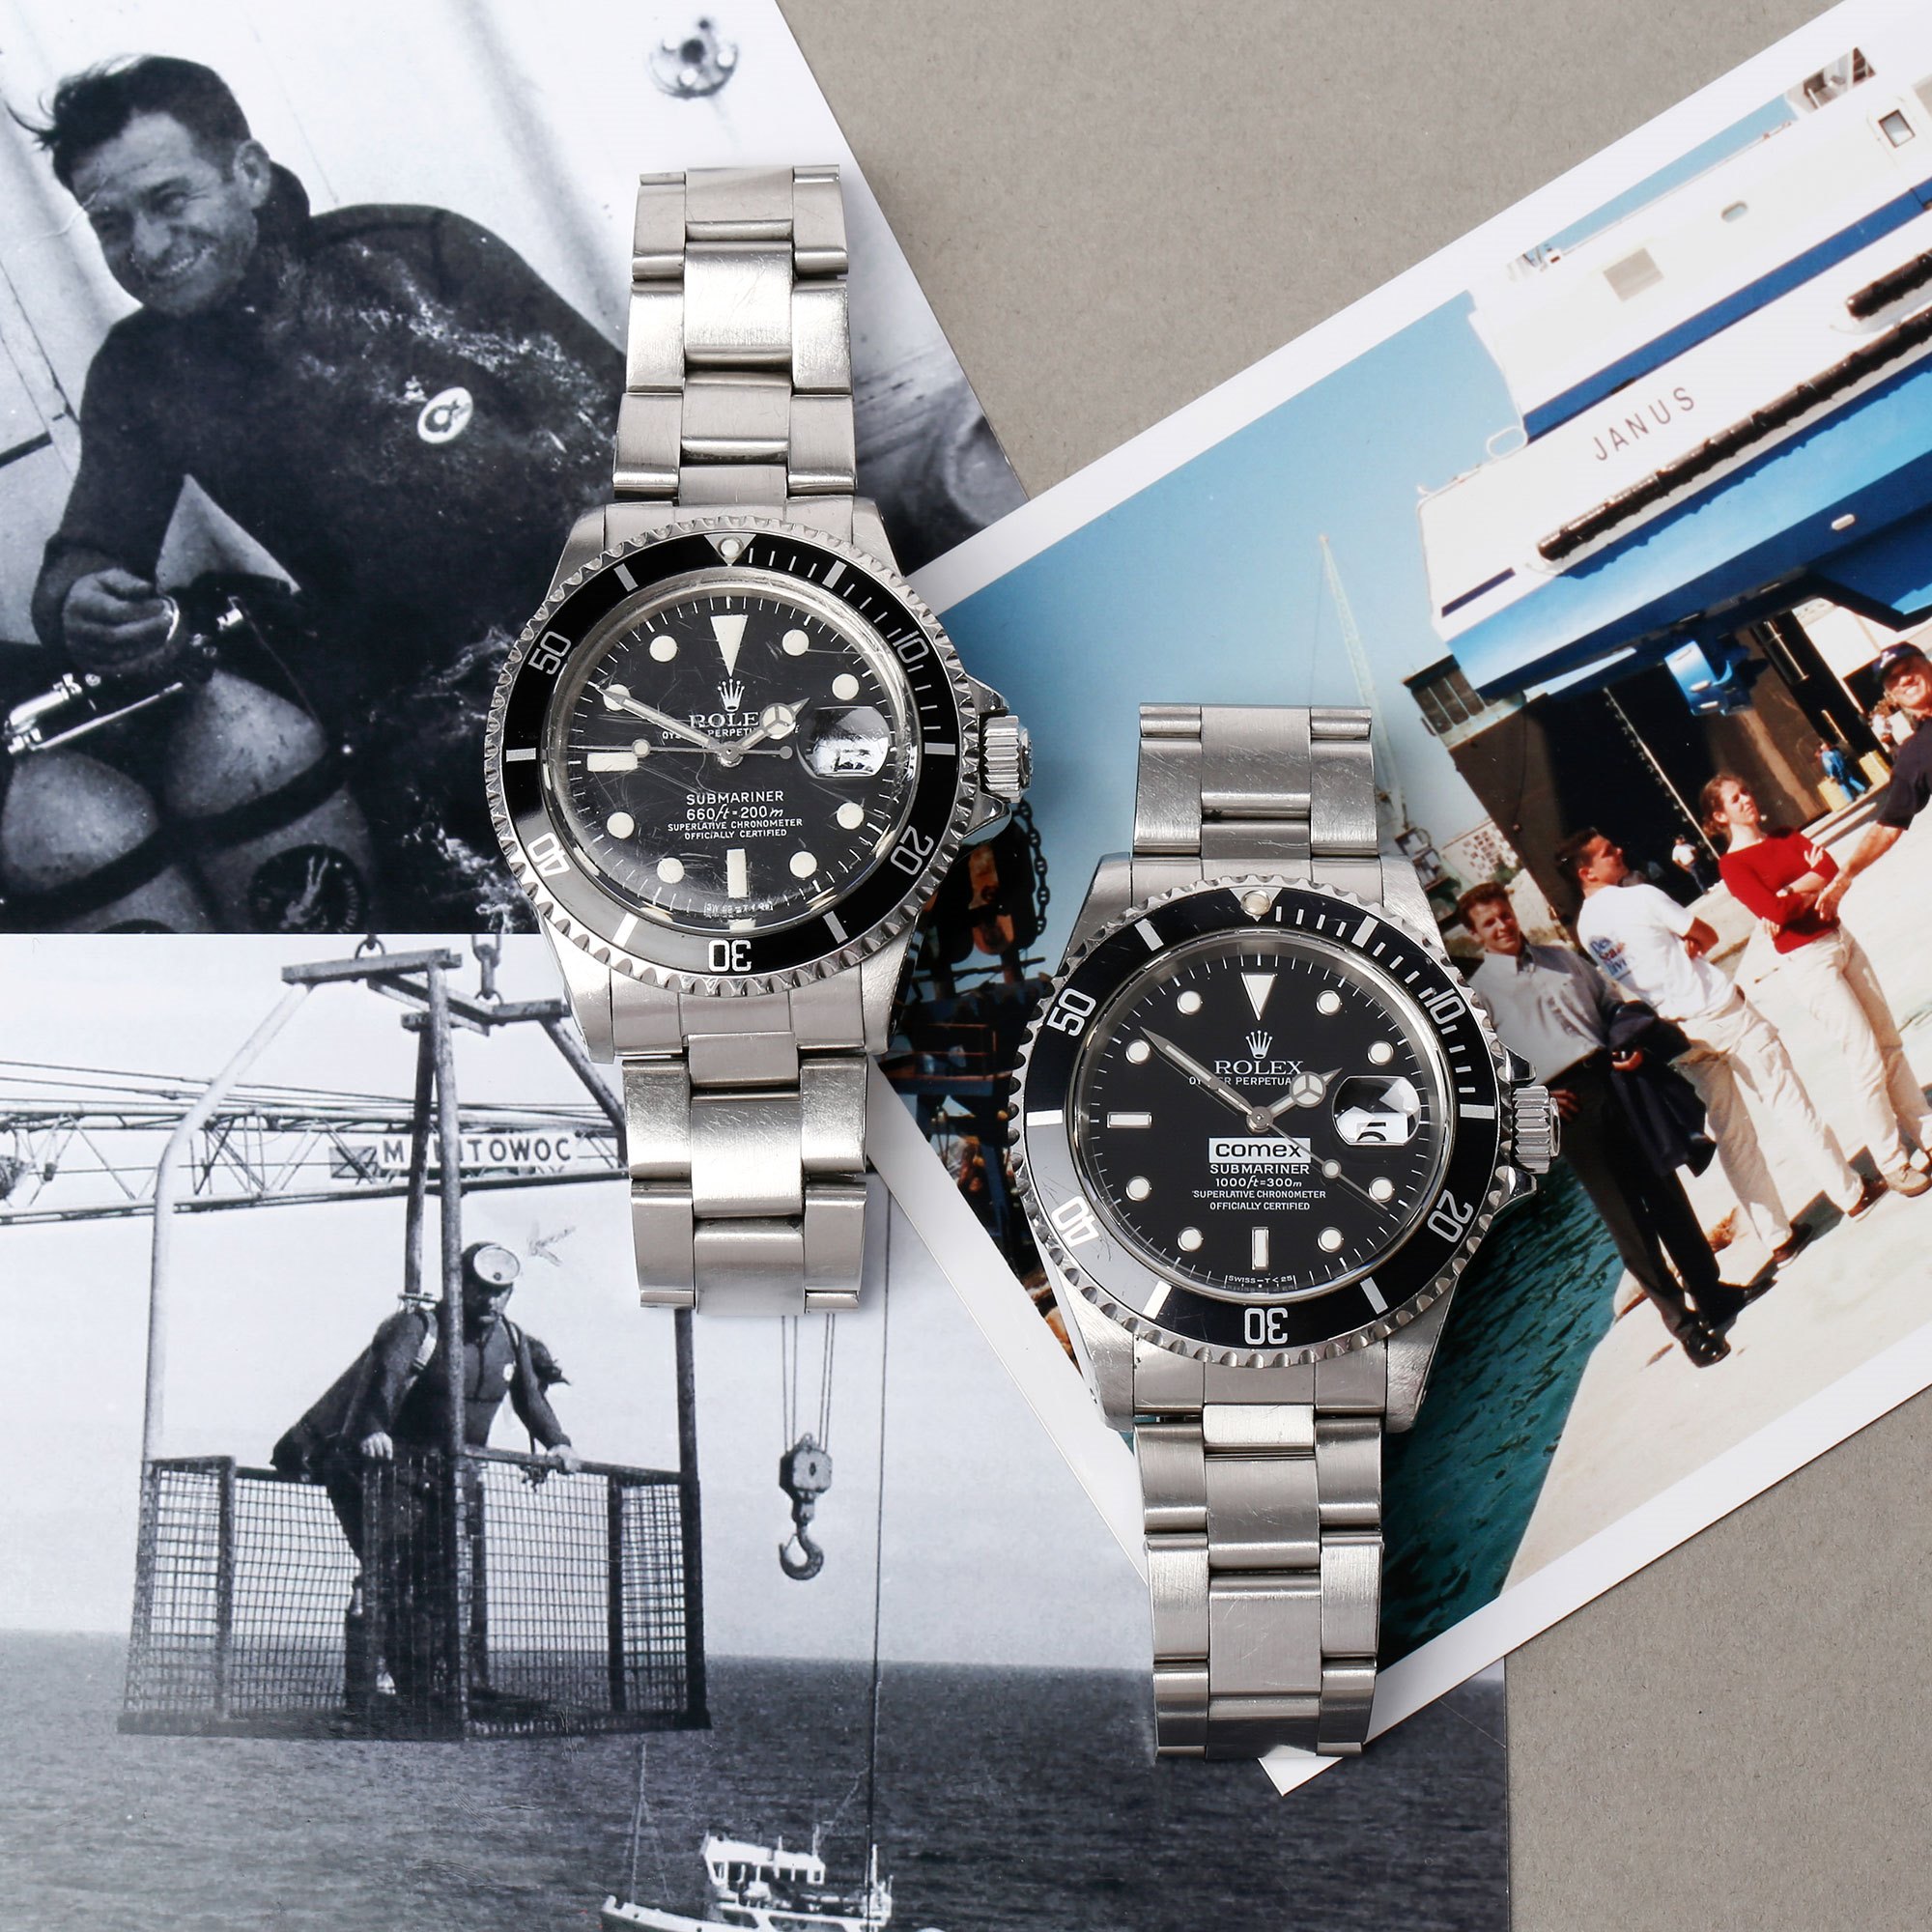 Rolex Submariner 'Comex' Stainless Steel - 1680 Stainless Steel 1680